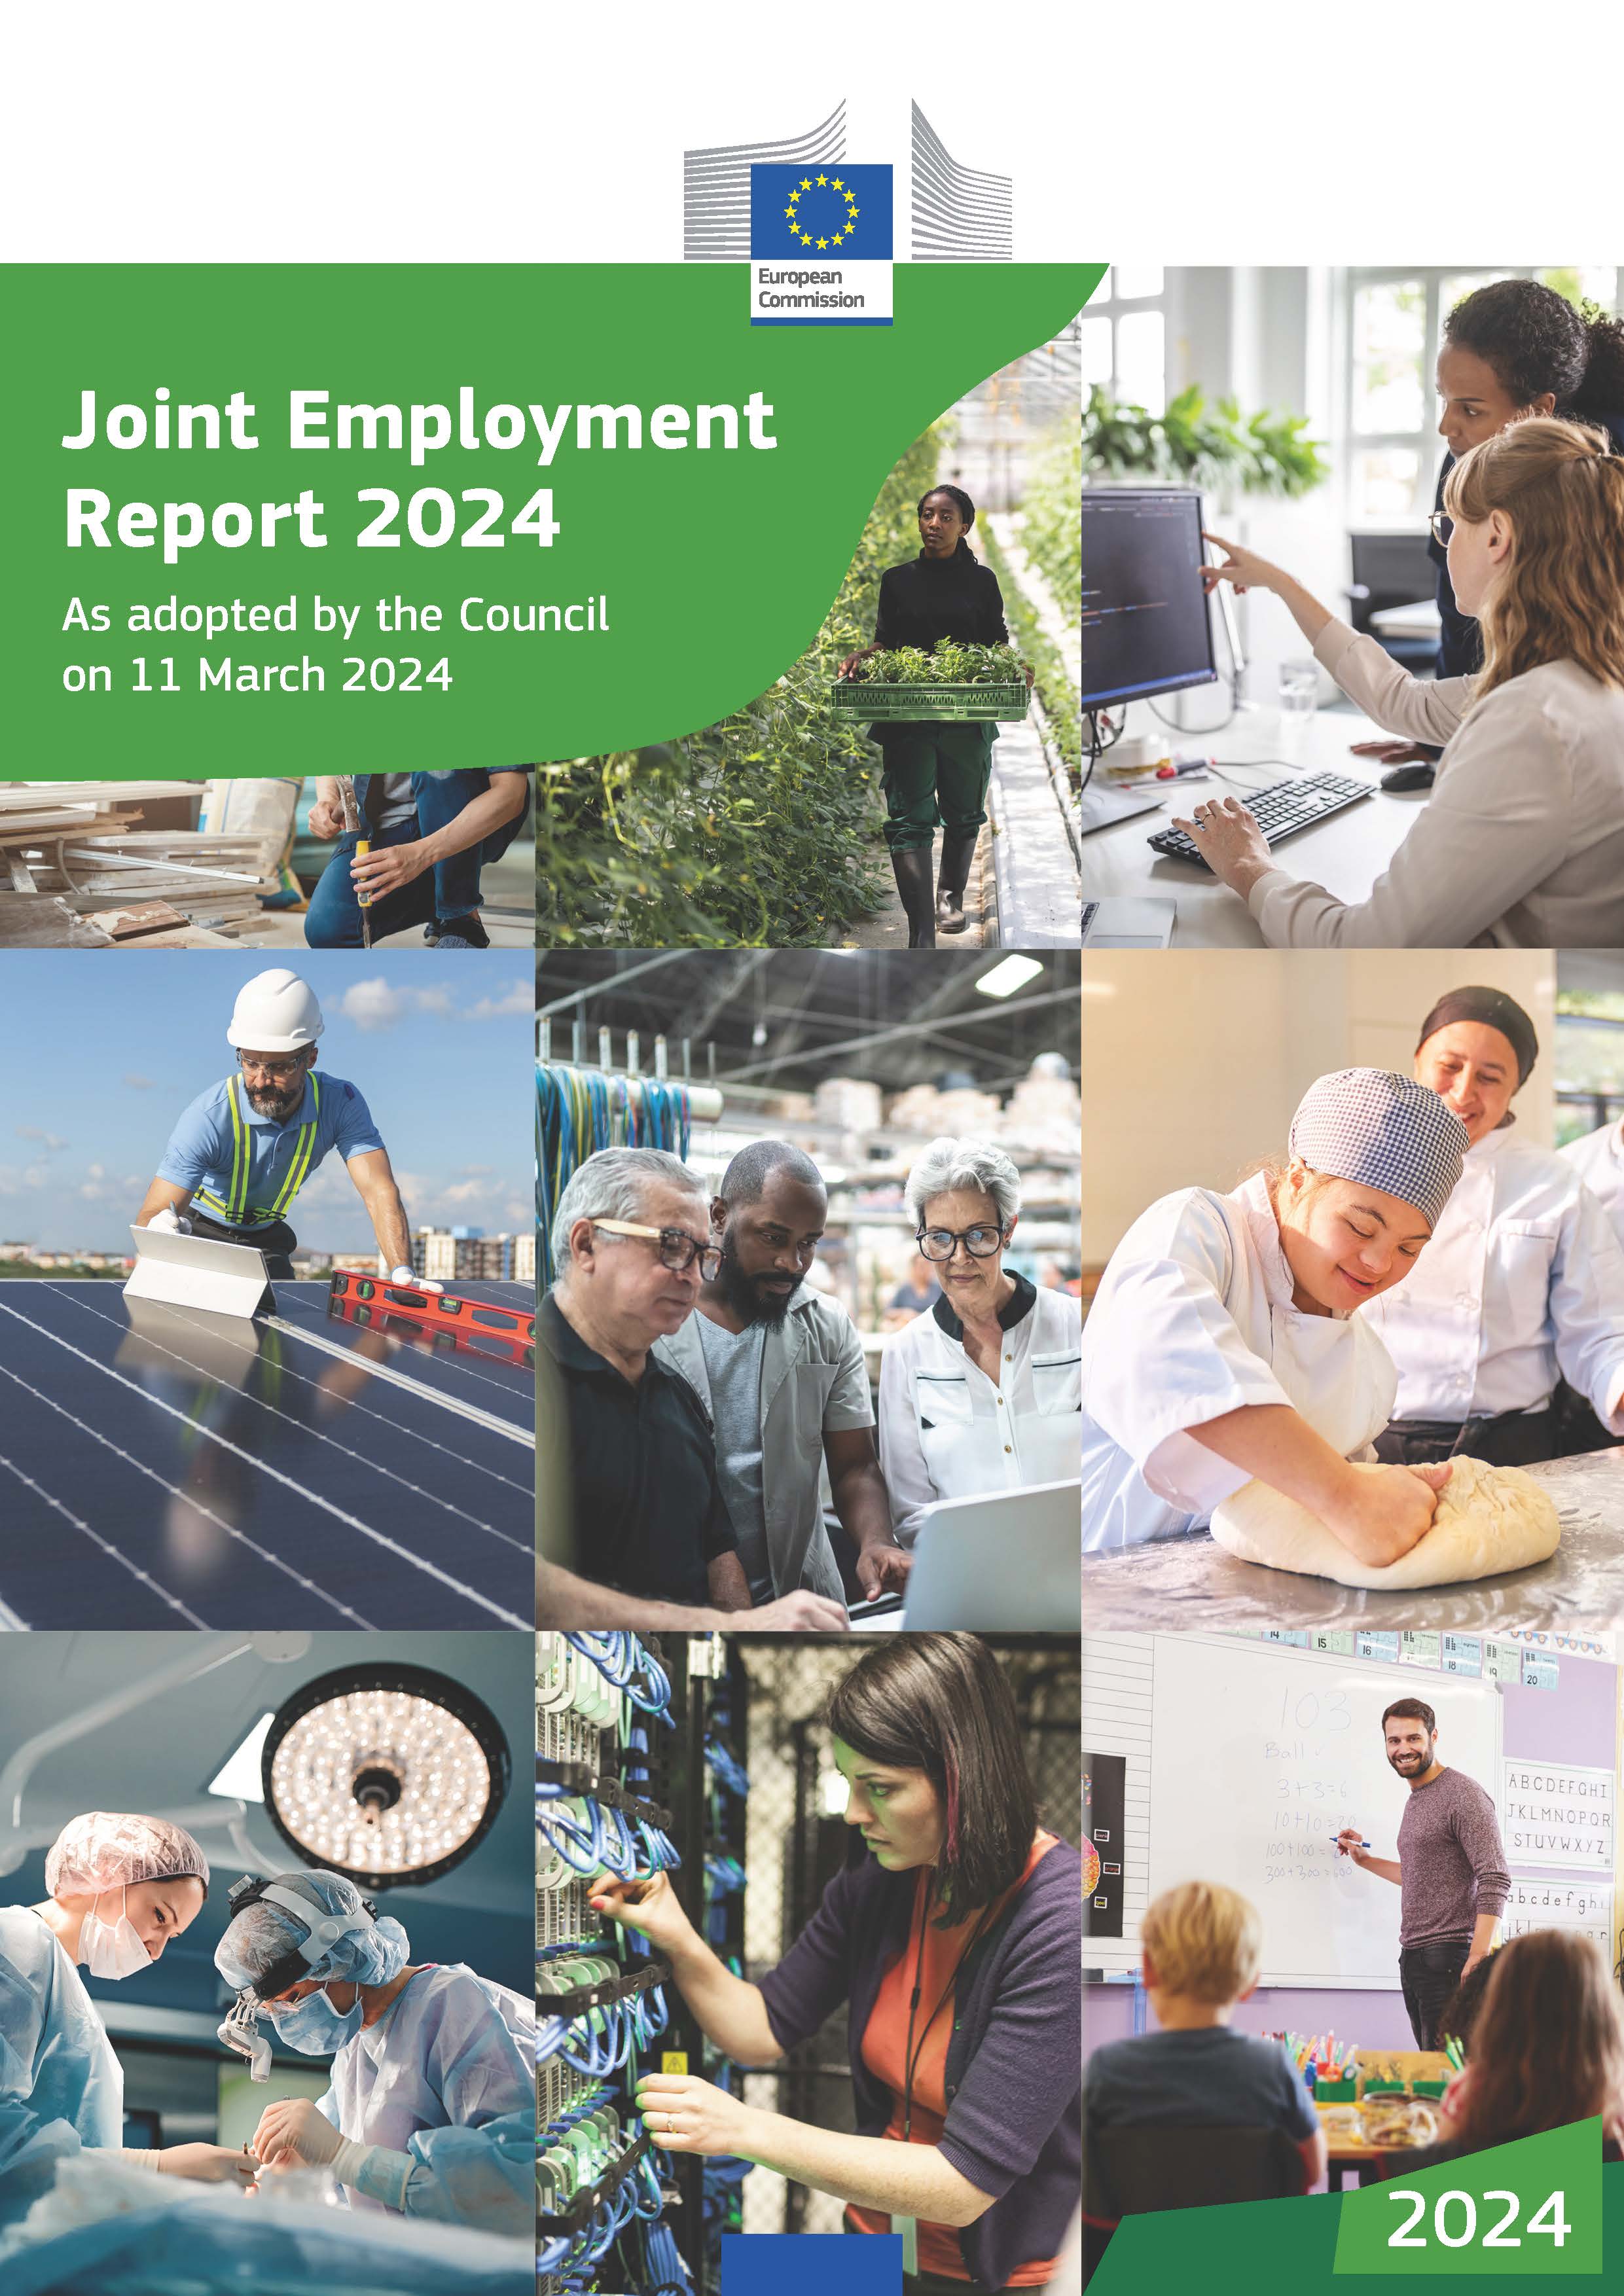 Joint Employment Report 2024
